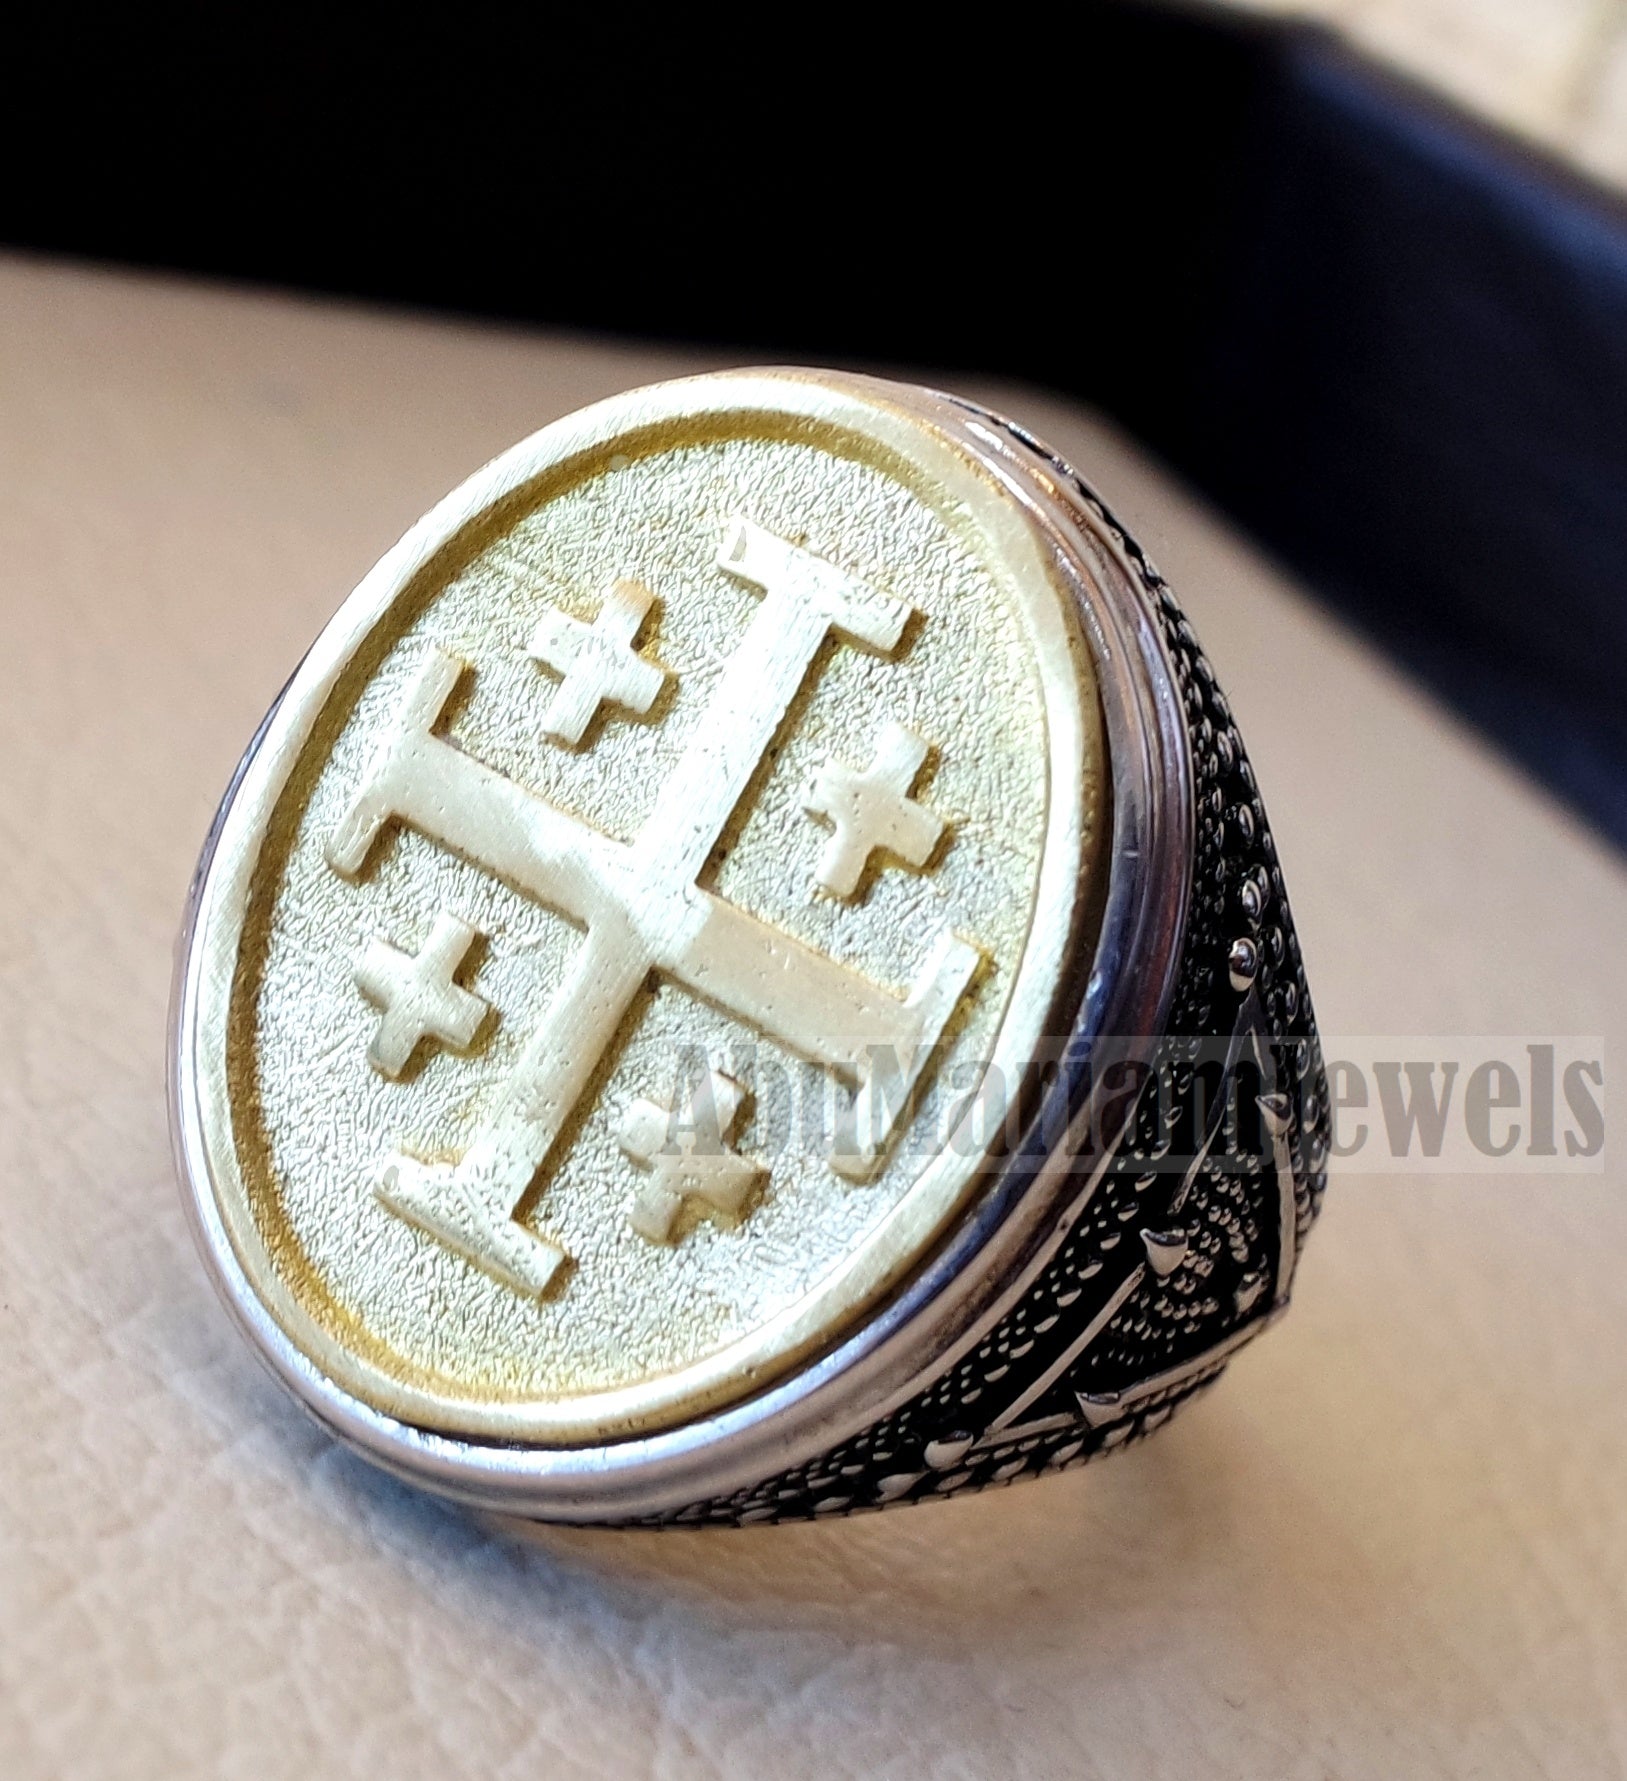 Jerusalem Cross ring christ christian symbol sterling silver 925 and bronze man gift jewelry oval vintage style all sizes Catholic Orthodox